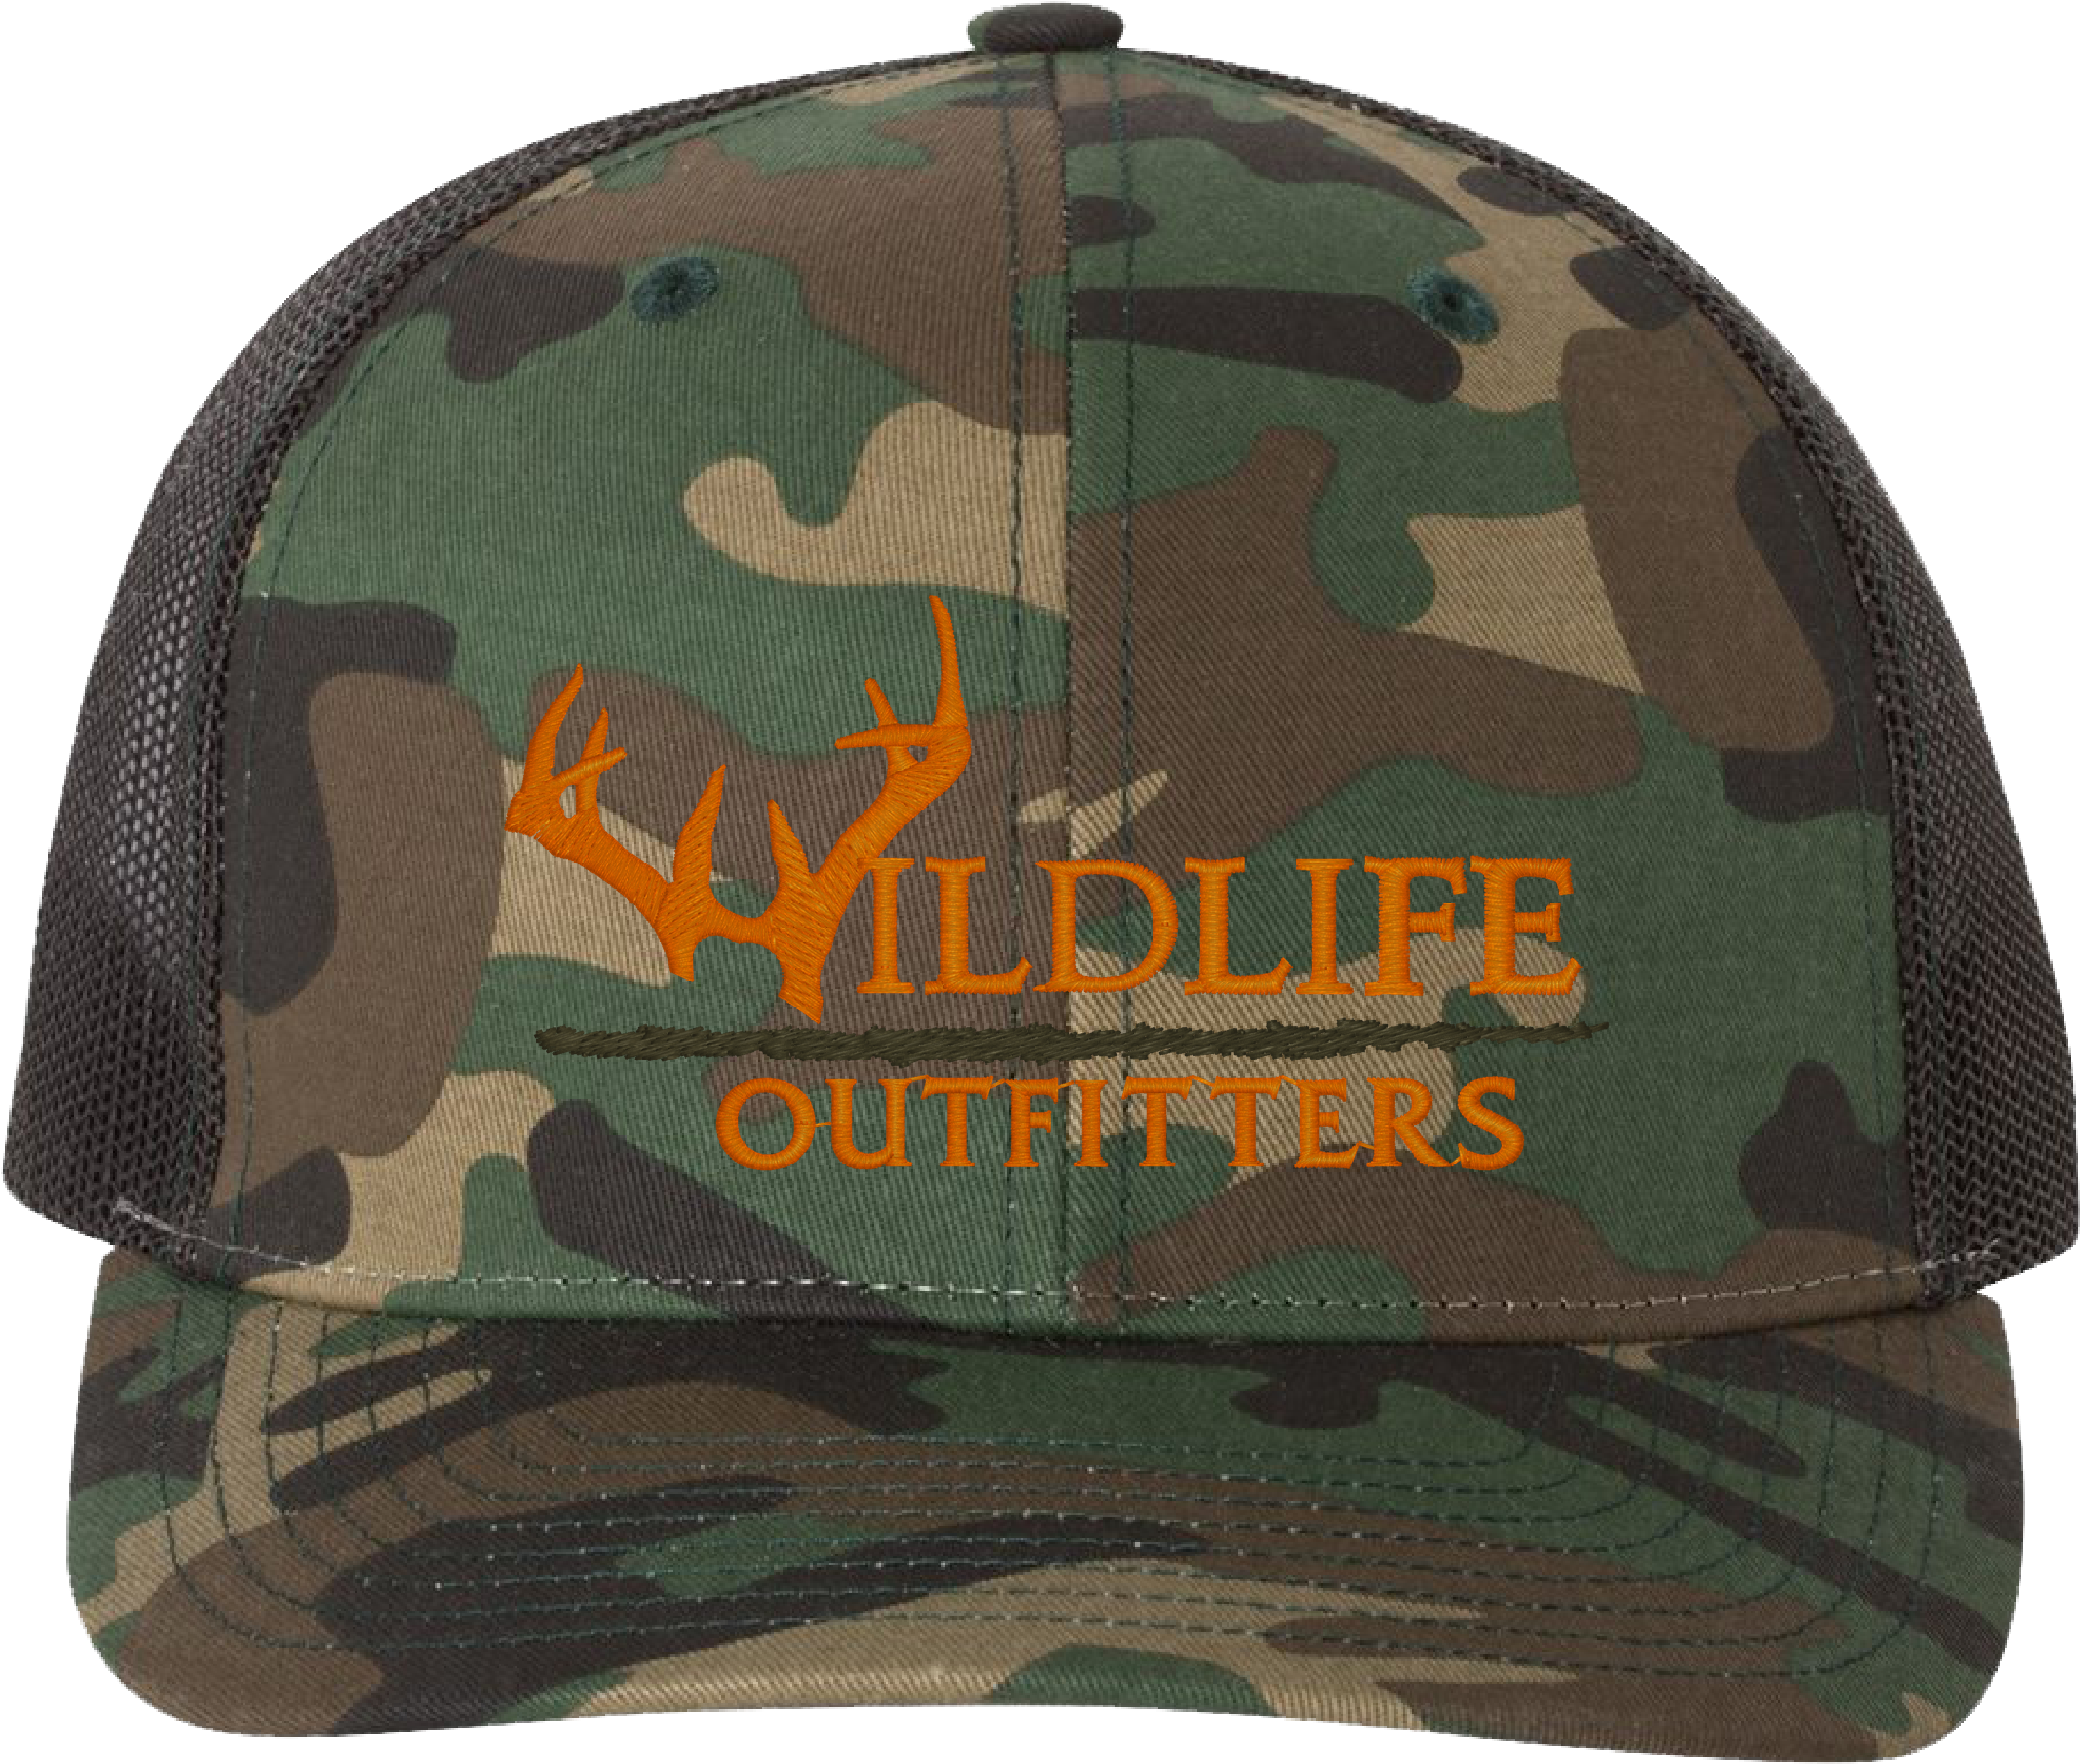 Download PNG image - Camo Army Hat PNG Image 